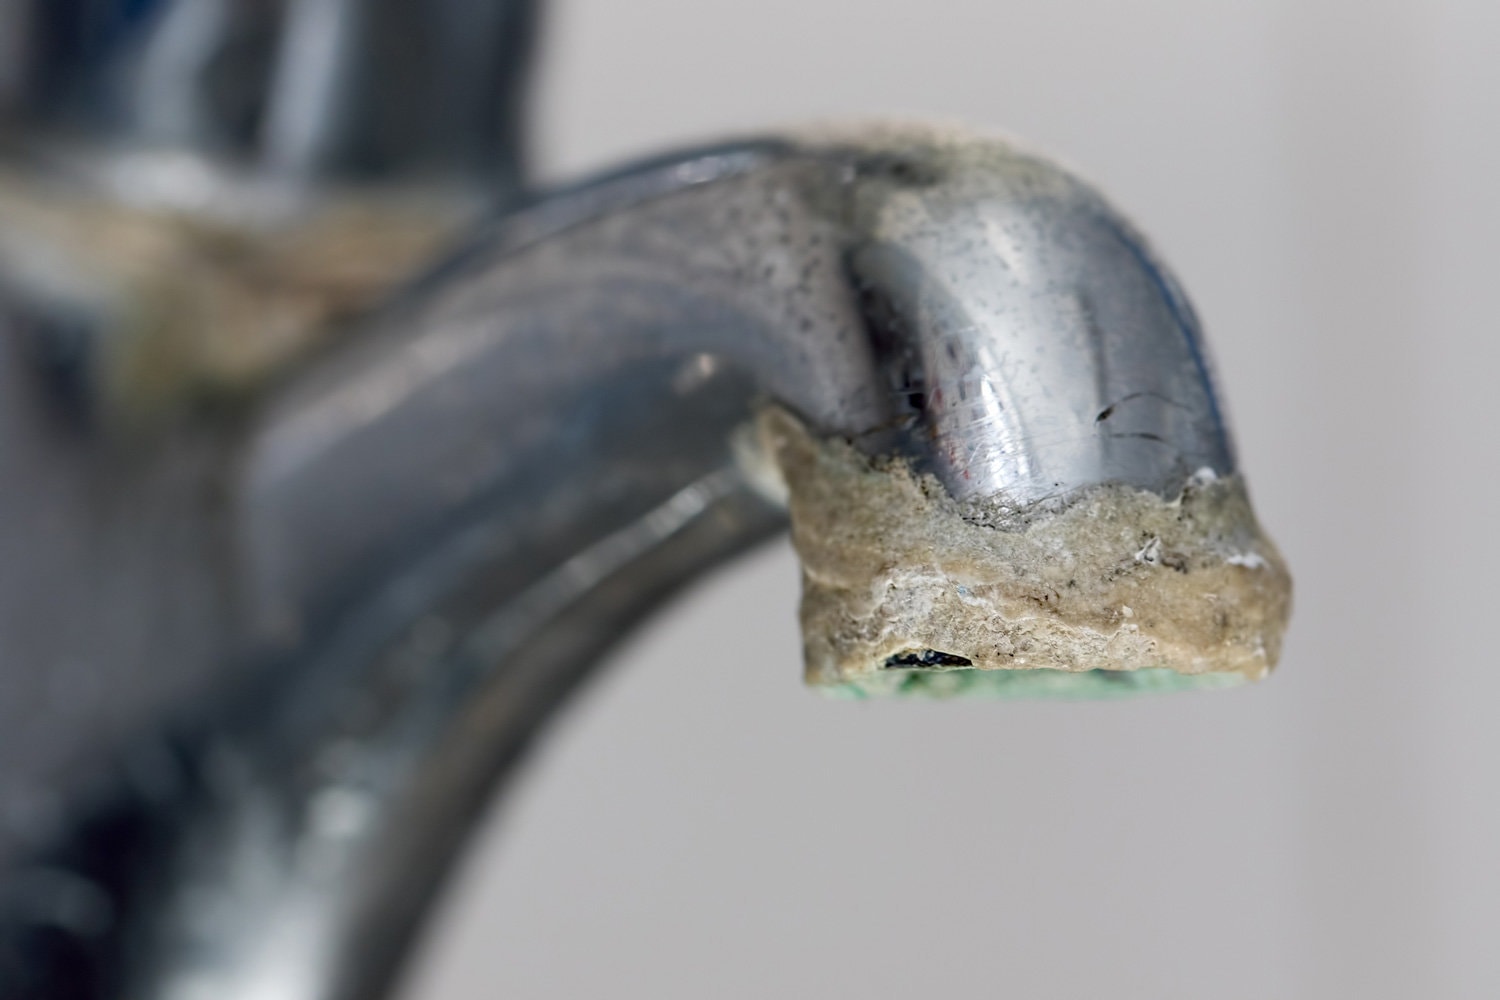 Close-up of limescale build-up. Selective focus on hard water deposit on old tap spout. Chrome kitchen or bathroom faucet with crusty calcium carbonate needing descaler.